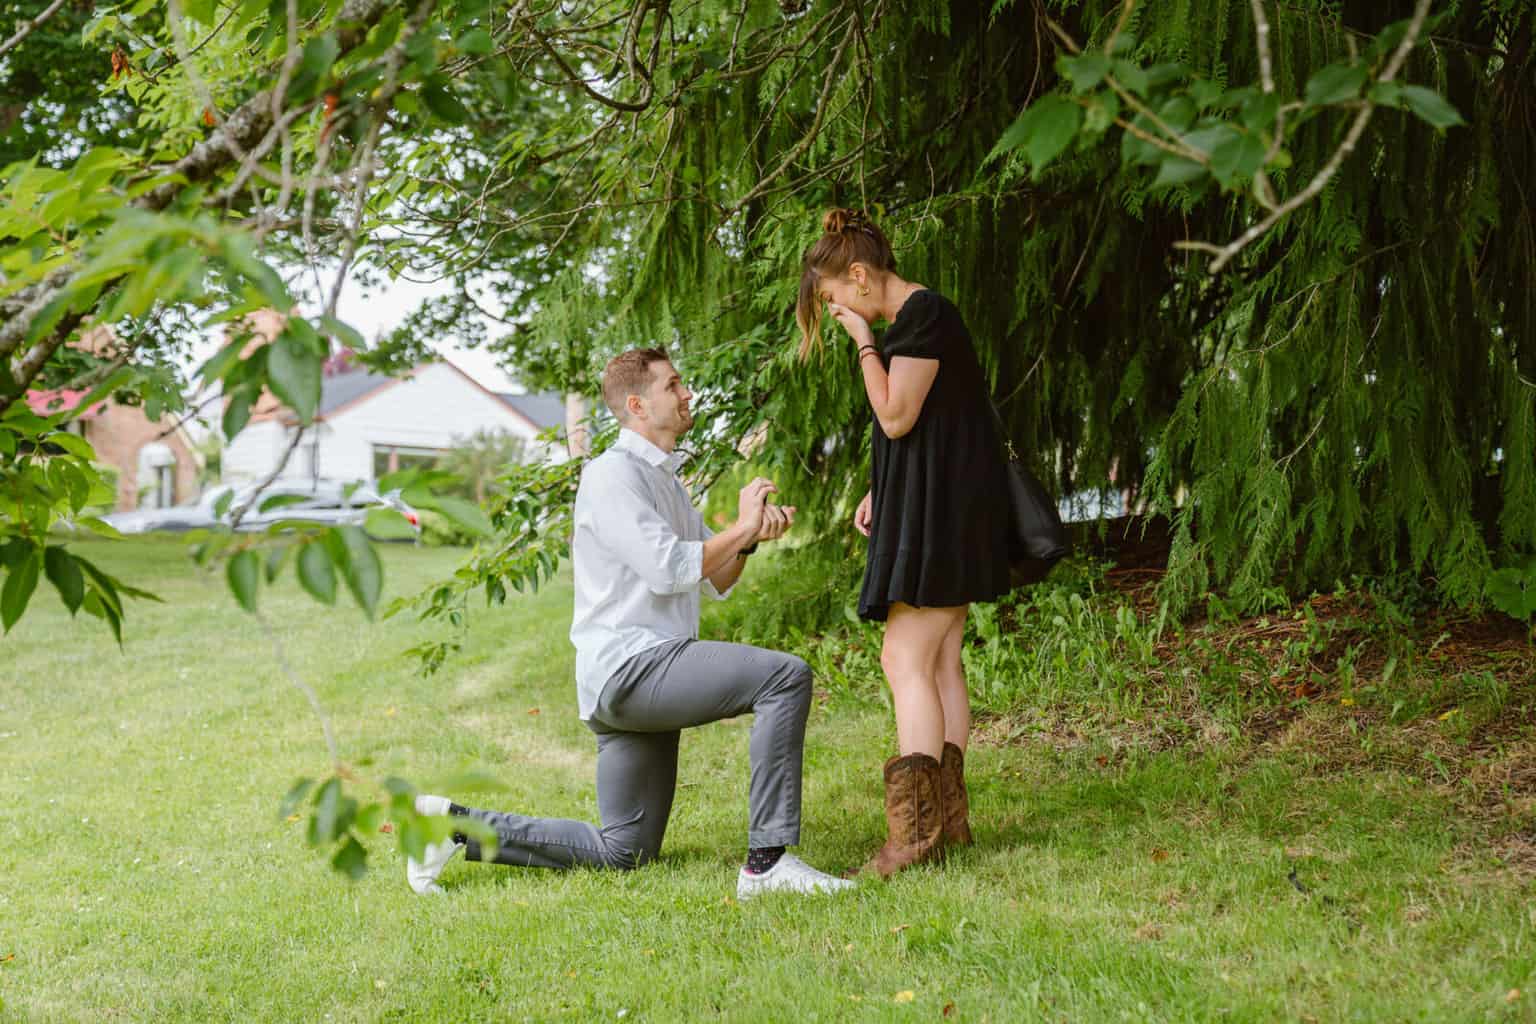 Man proposes to woman at Green Lake Park in Seattle